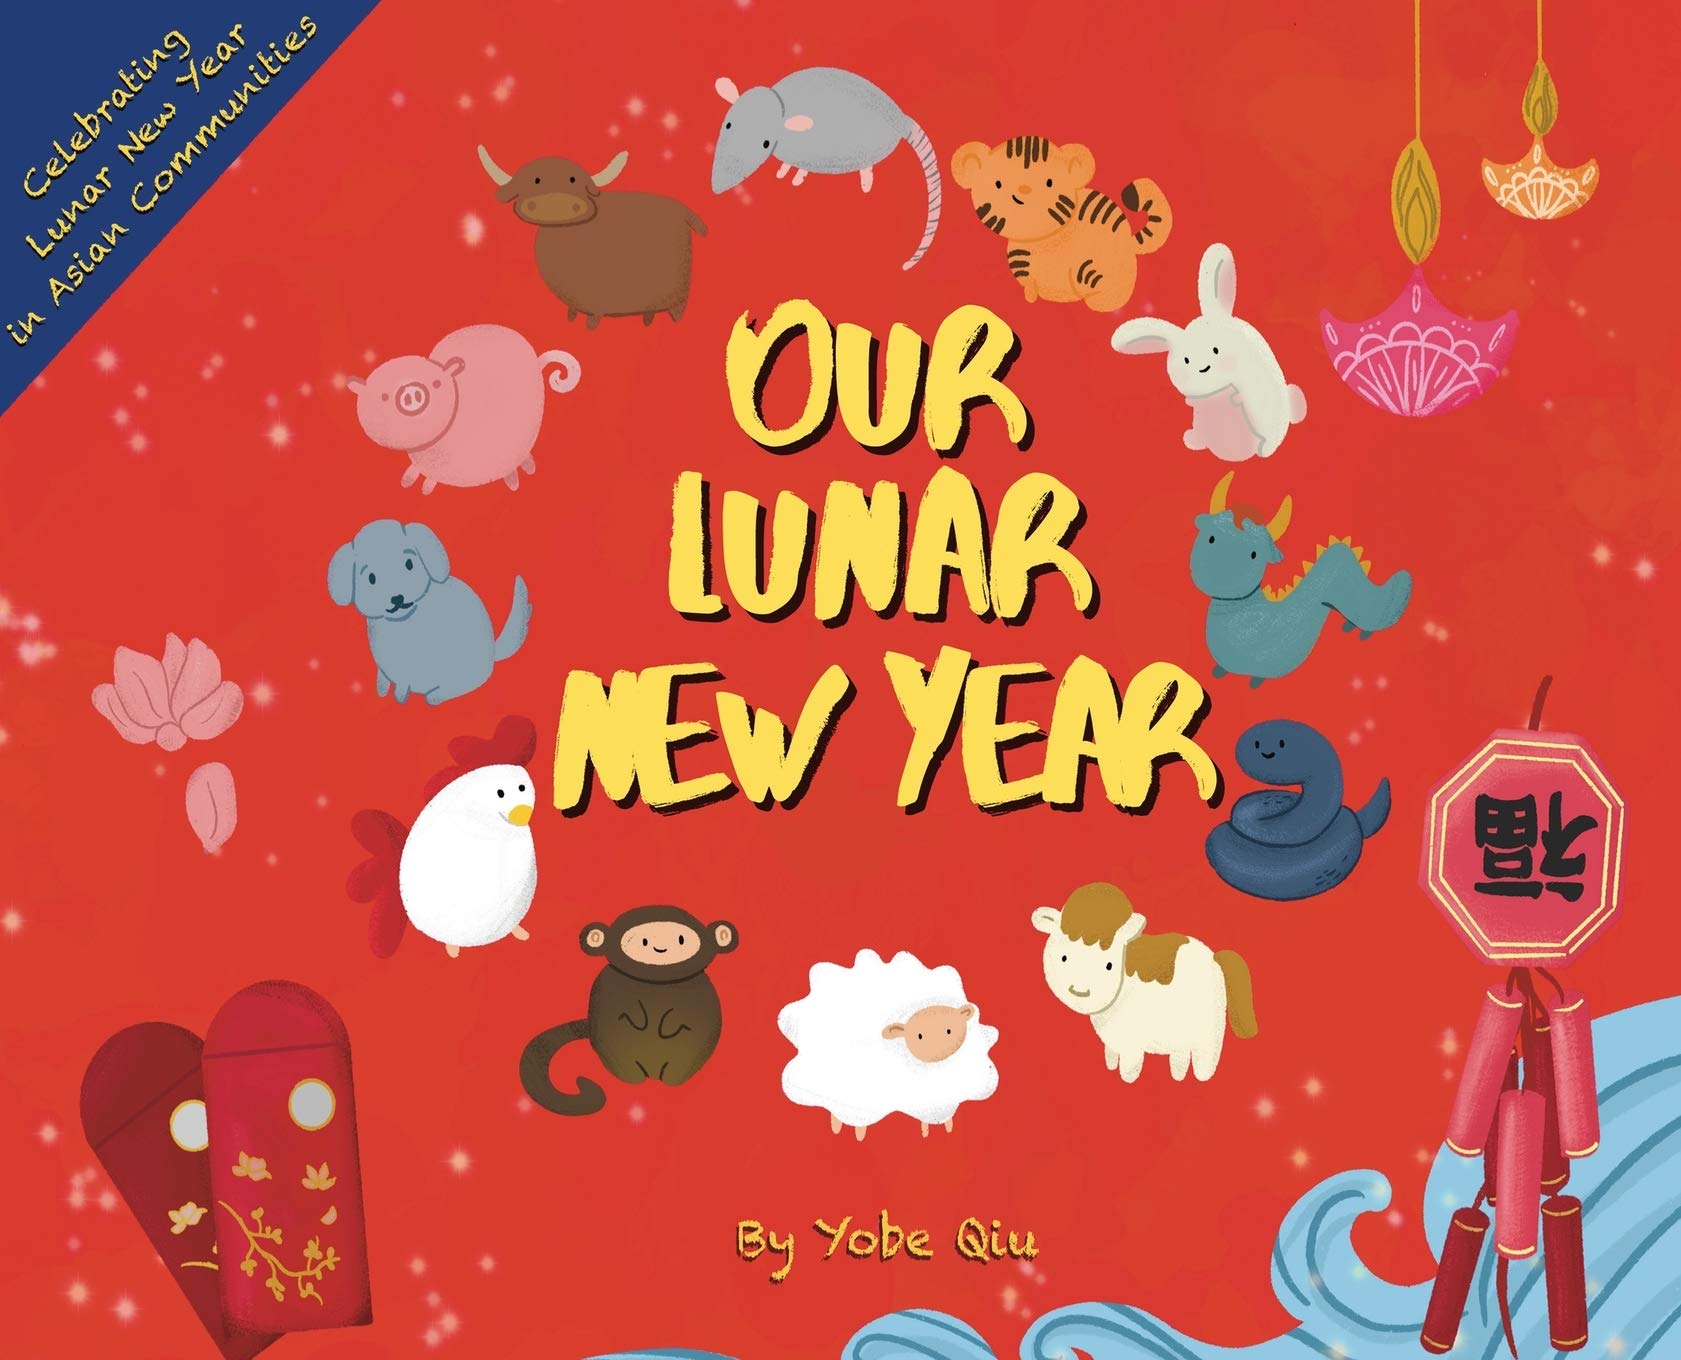 Our Lunar New Year